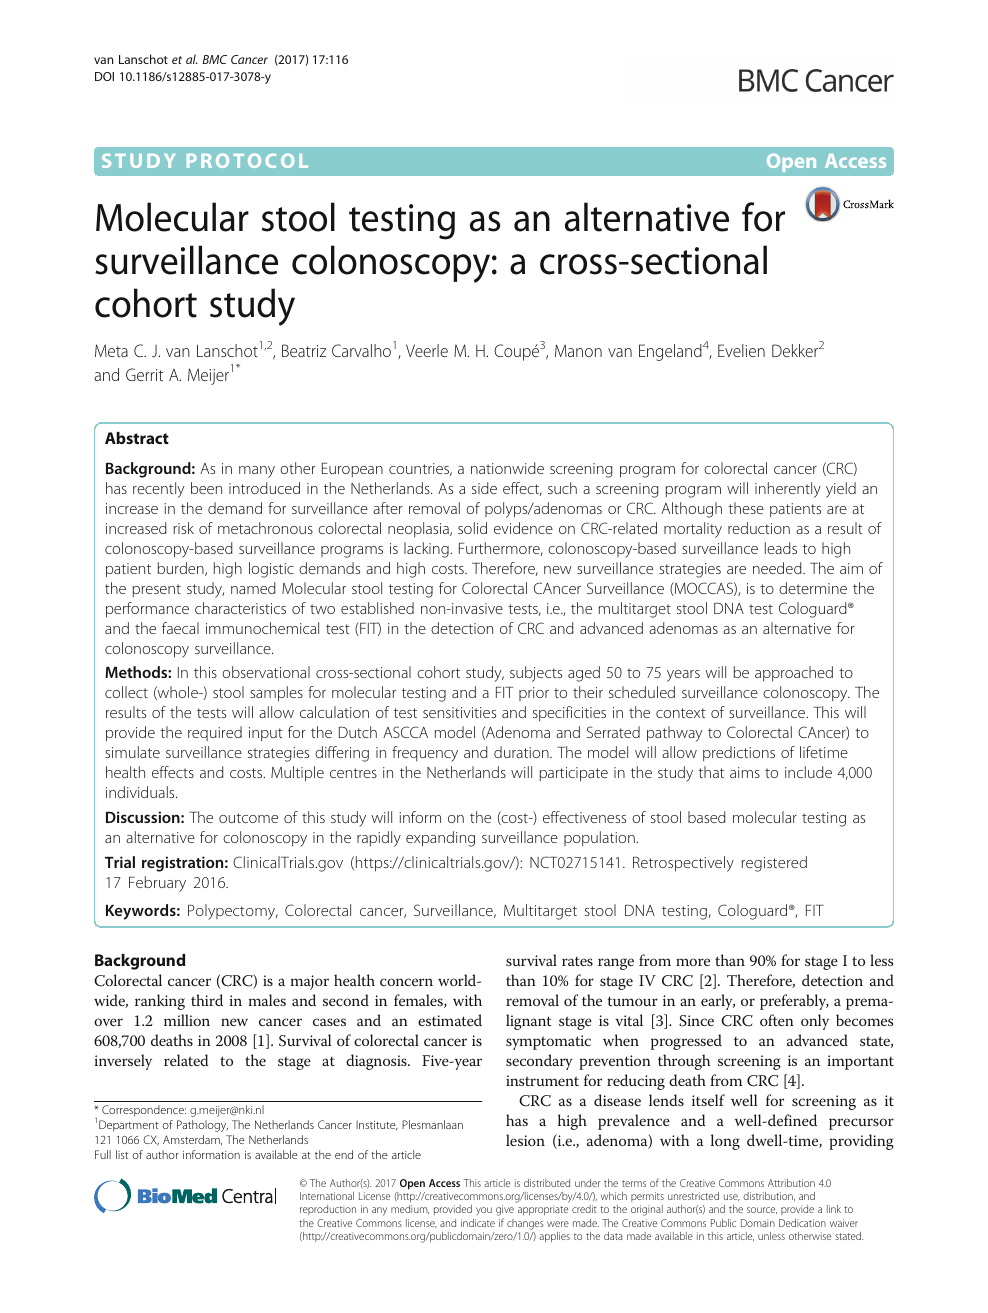 Molecular Stool Testing As An Alternative For Surveillance Colonoscopy A Cross Sectional Cohort Study Topic Of Research Paper In Clinical Medicine Download Scholarly Article Pdf And Read For Free On Cyberleninka Open